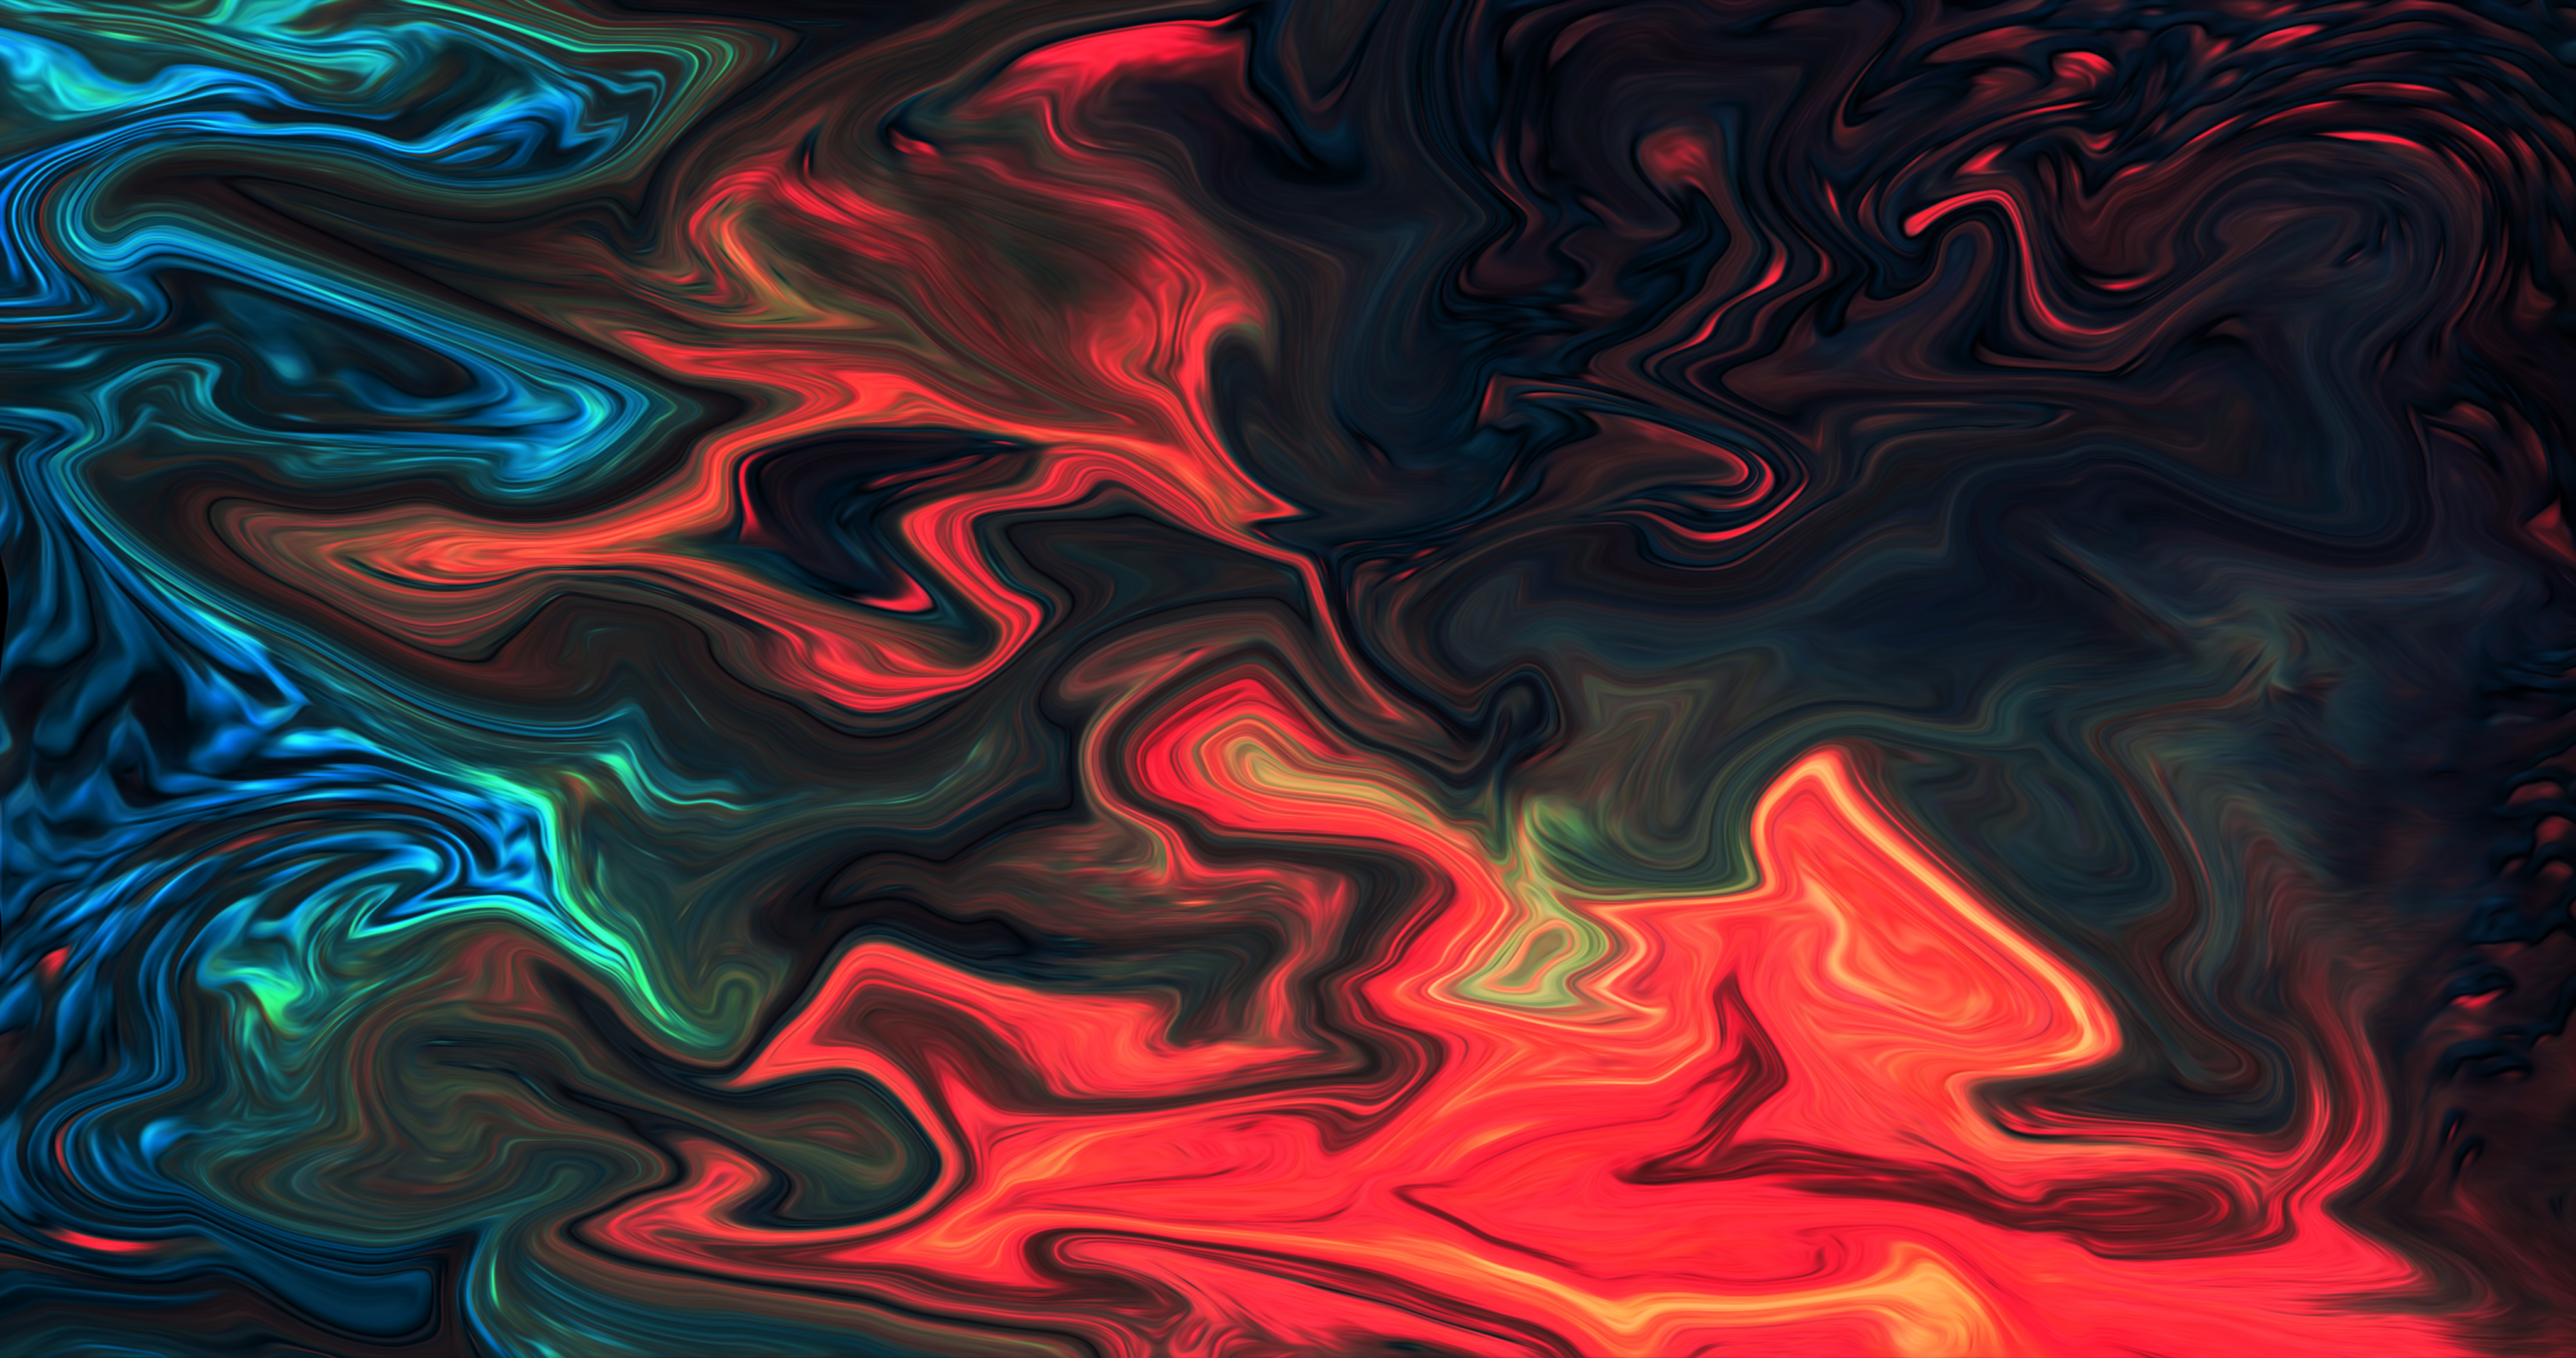 Abstract Fluid Liquid Colorful Artwork ArtStation Brush Paintbrushes Red Blue XEBELiON 4096x2160